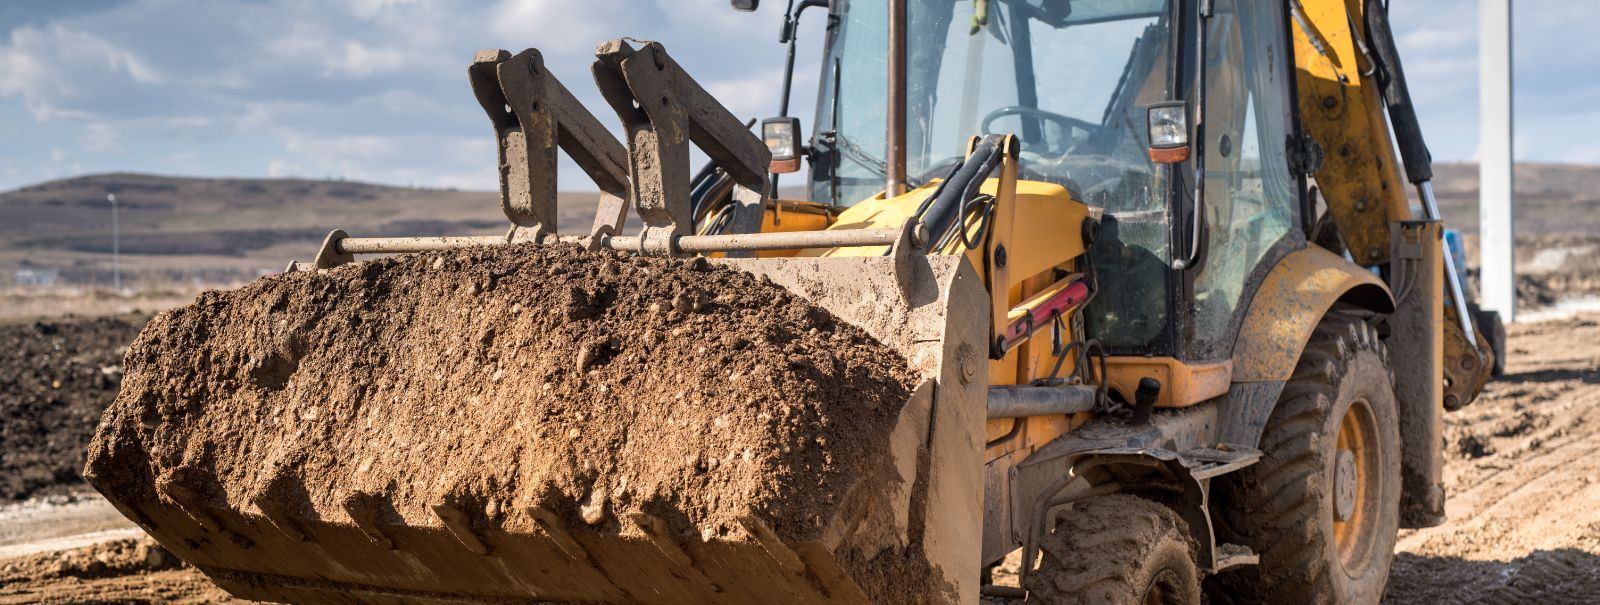 The world of excavation is on the brink of a revolution, with new technologies and practices set to transform the way we dig, move, and manage earth. As we look